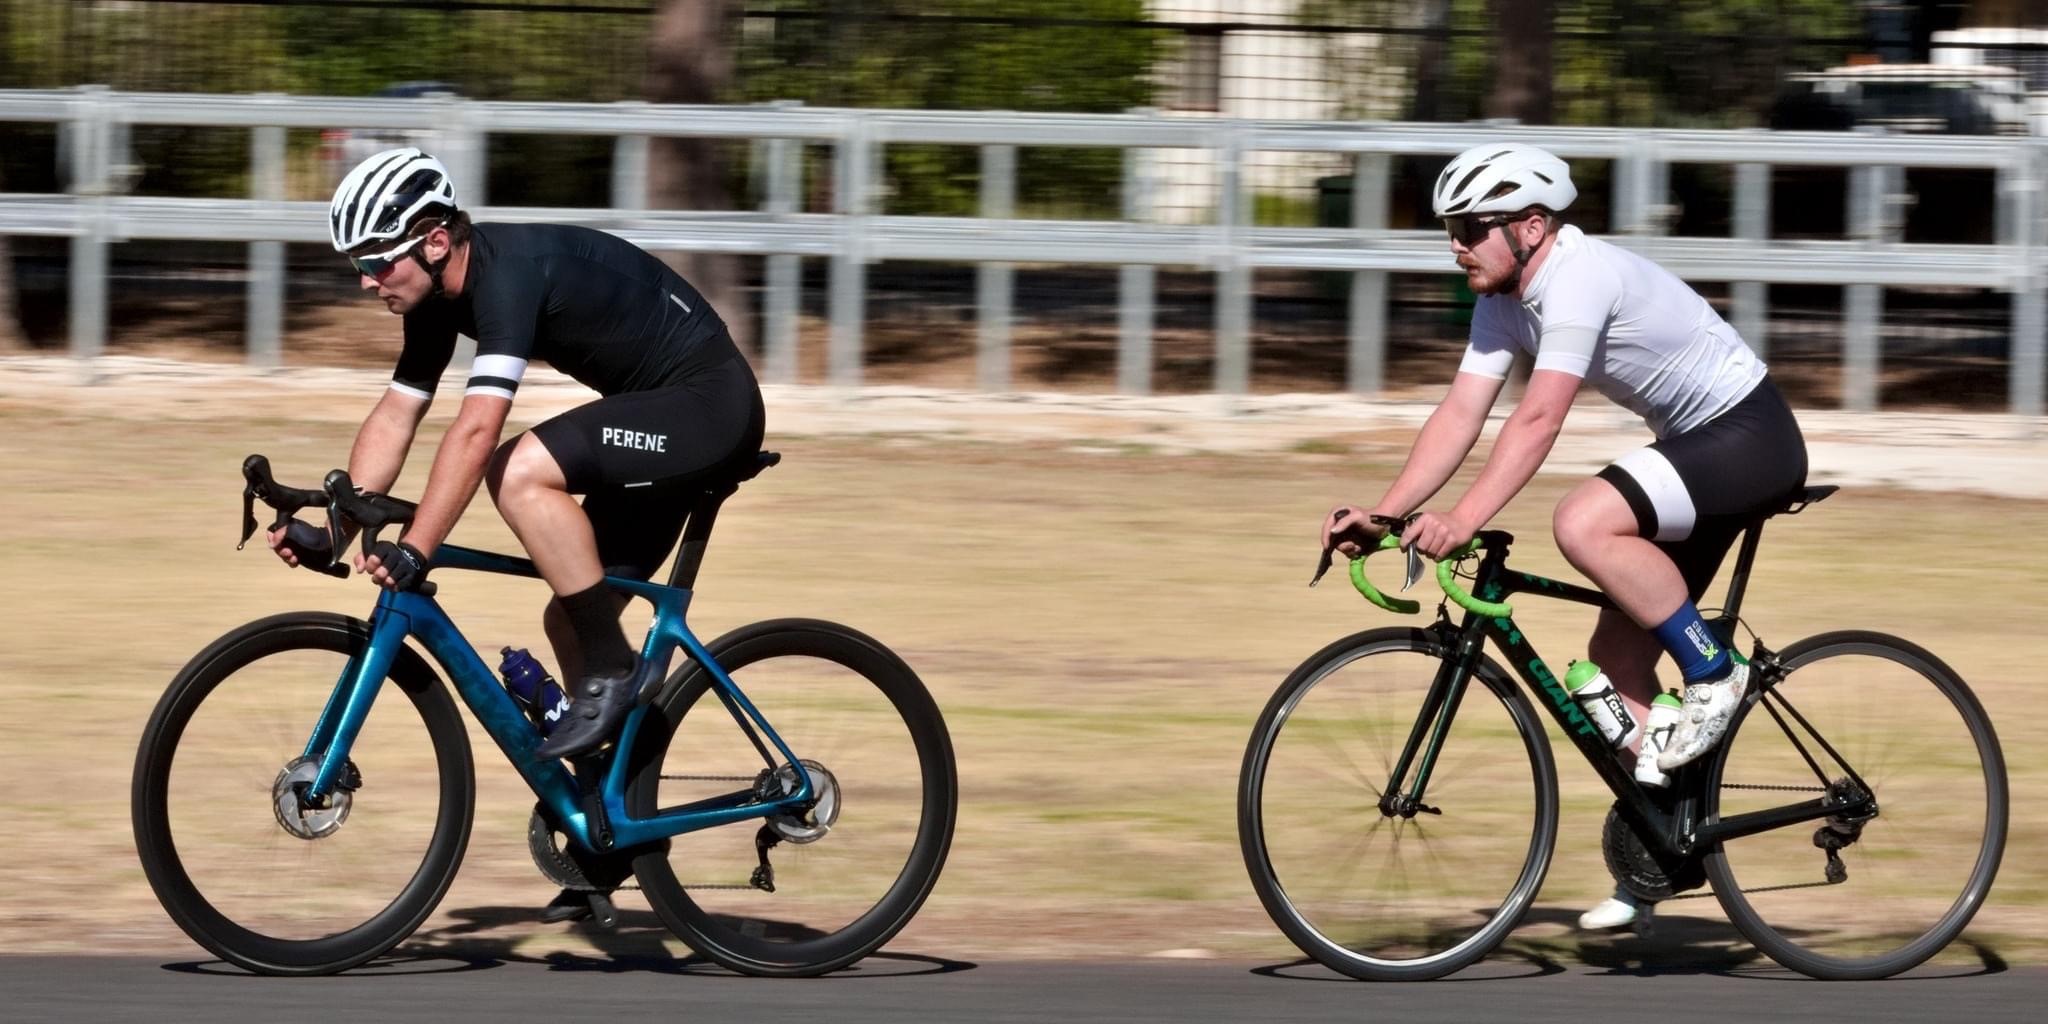 A pair of cyclists on a track during a race.